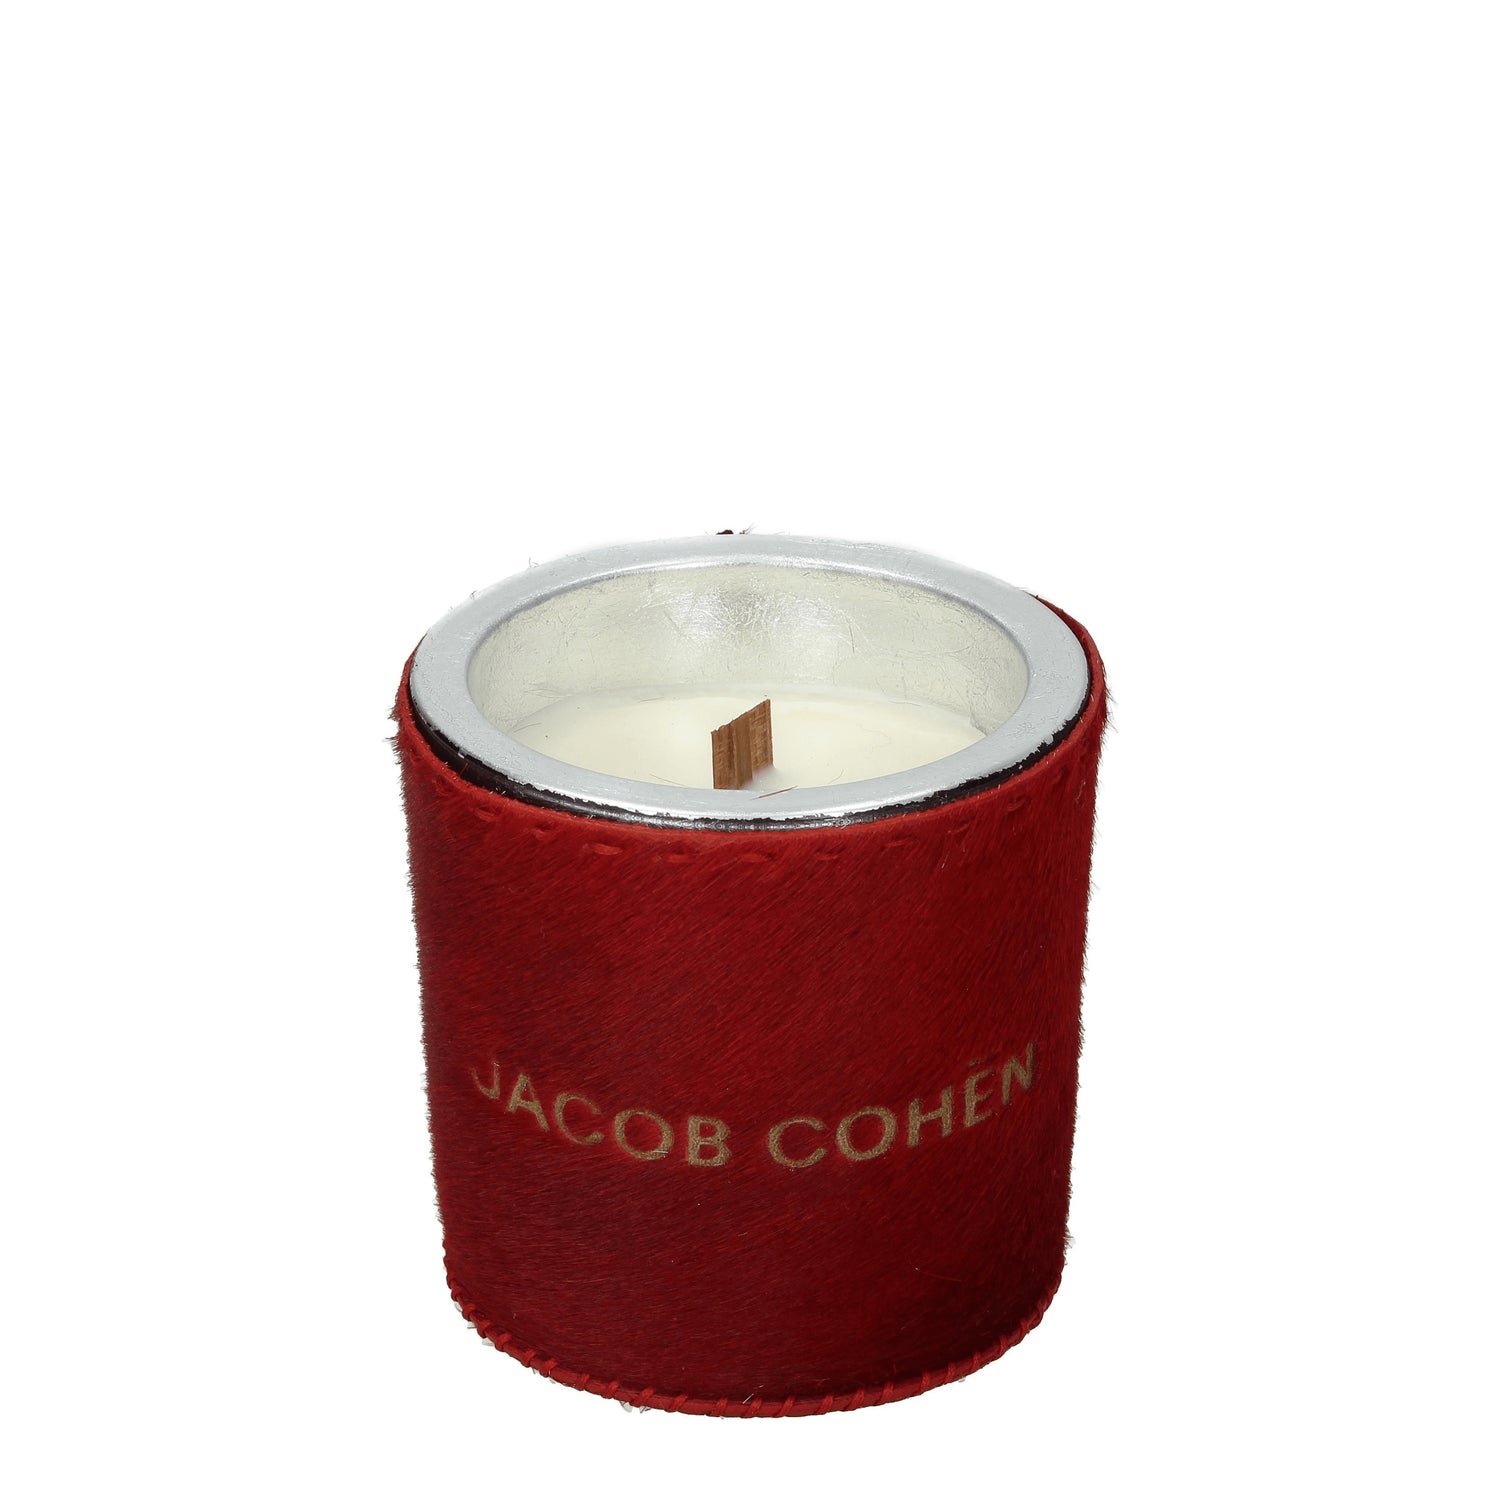 Jacob Cohen Idee Regalo handmade scented soy candle Donna Cavallino Rosso Rossetto